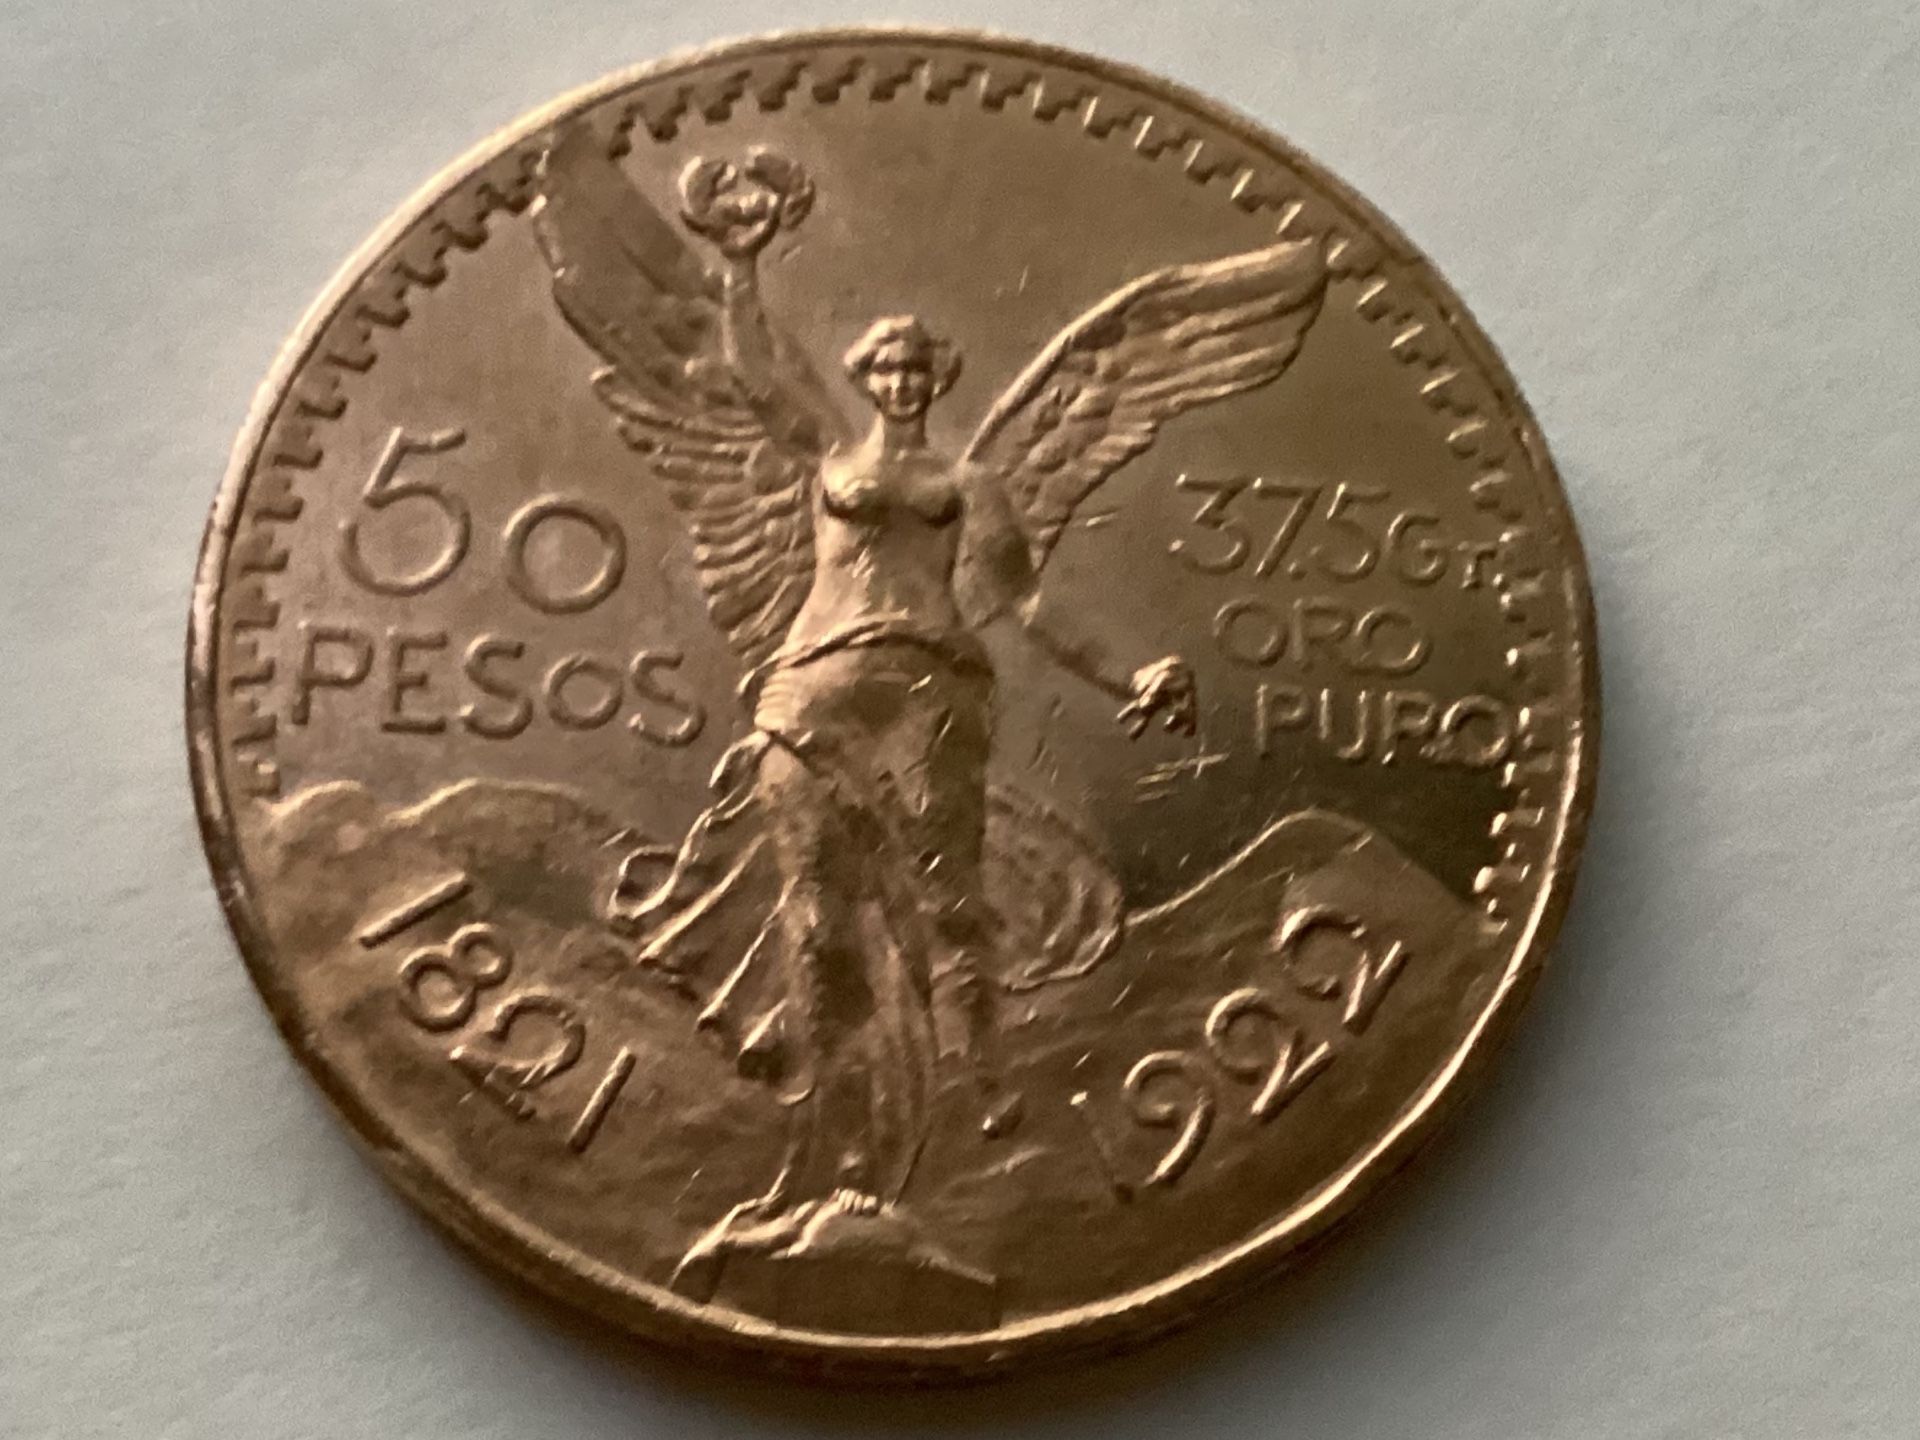 AMAZING 1922 GOLD  MEXICAN CENTENARIO (VERY VALUABLE YEAR , YEAR AFTER YEAR VALUE GOES UP)